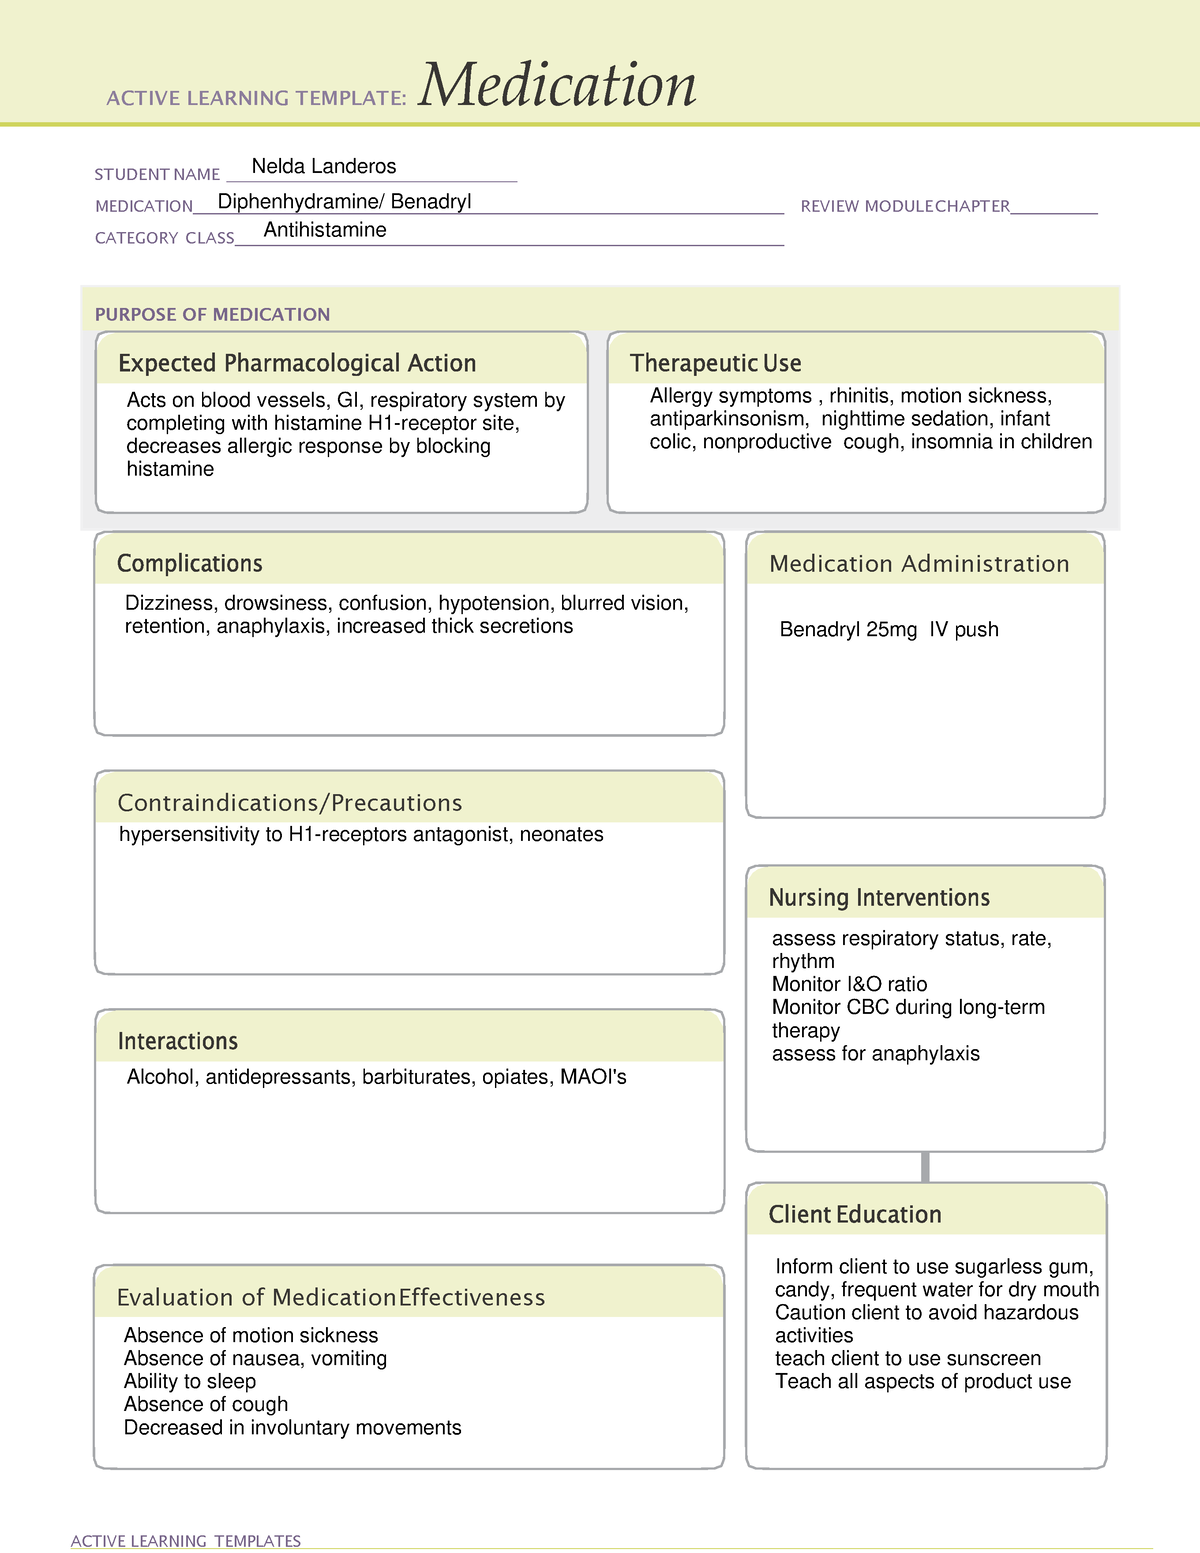 Diphenhydramine Ati Medication Template For Lab Activ vrogue co